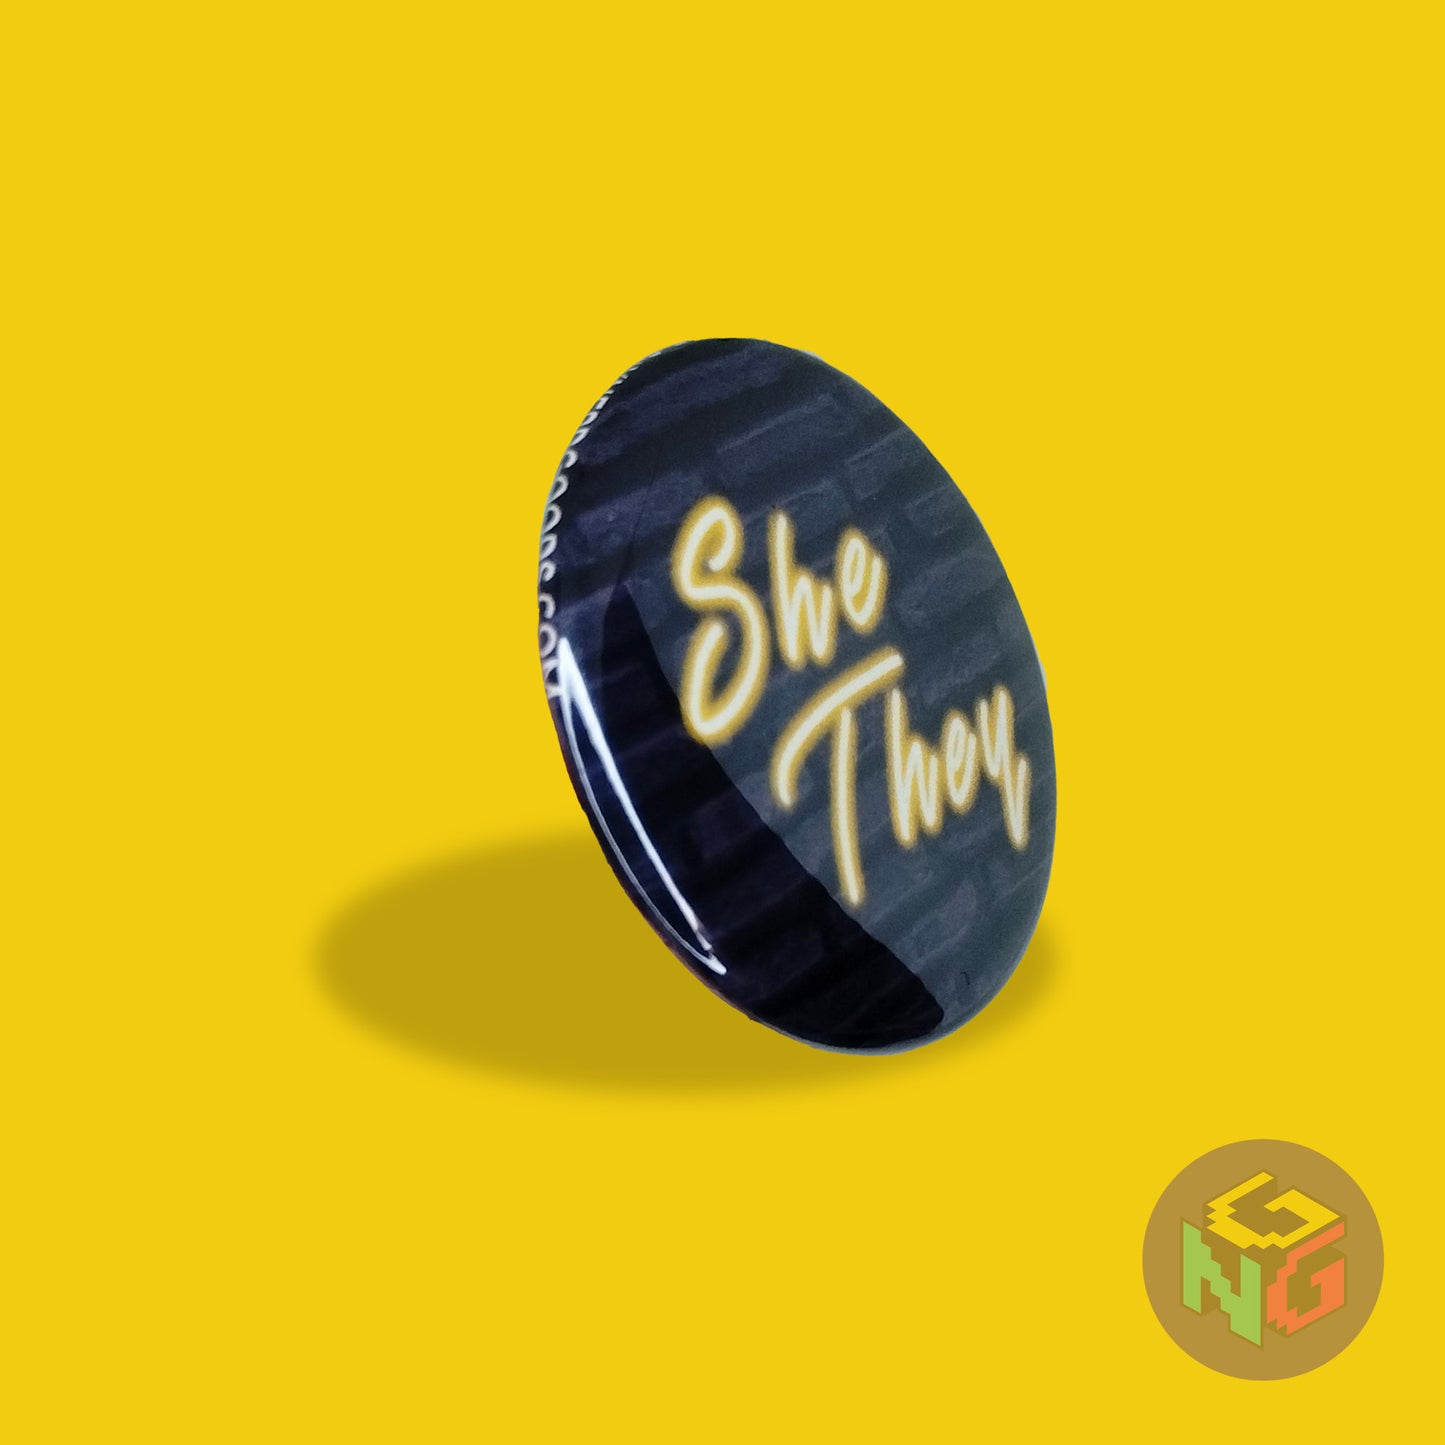 neon she they pride button with yellow text on a dark blue brick background facing to the right on a yellow background